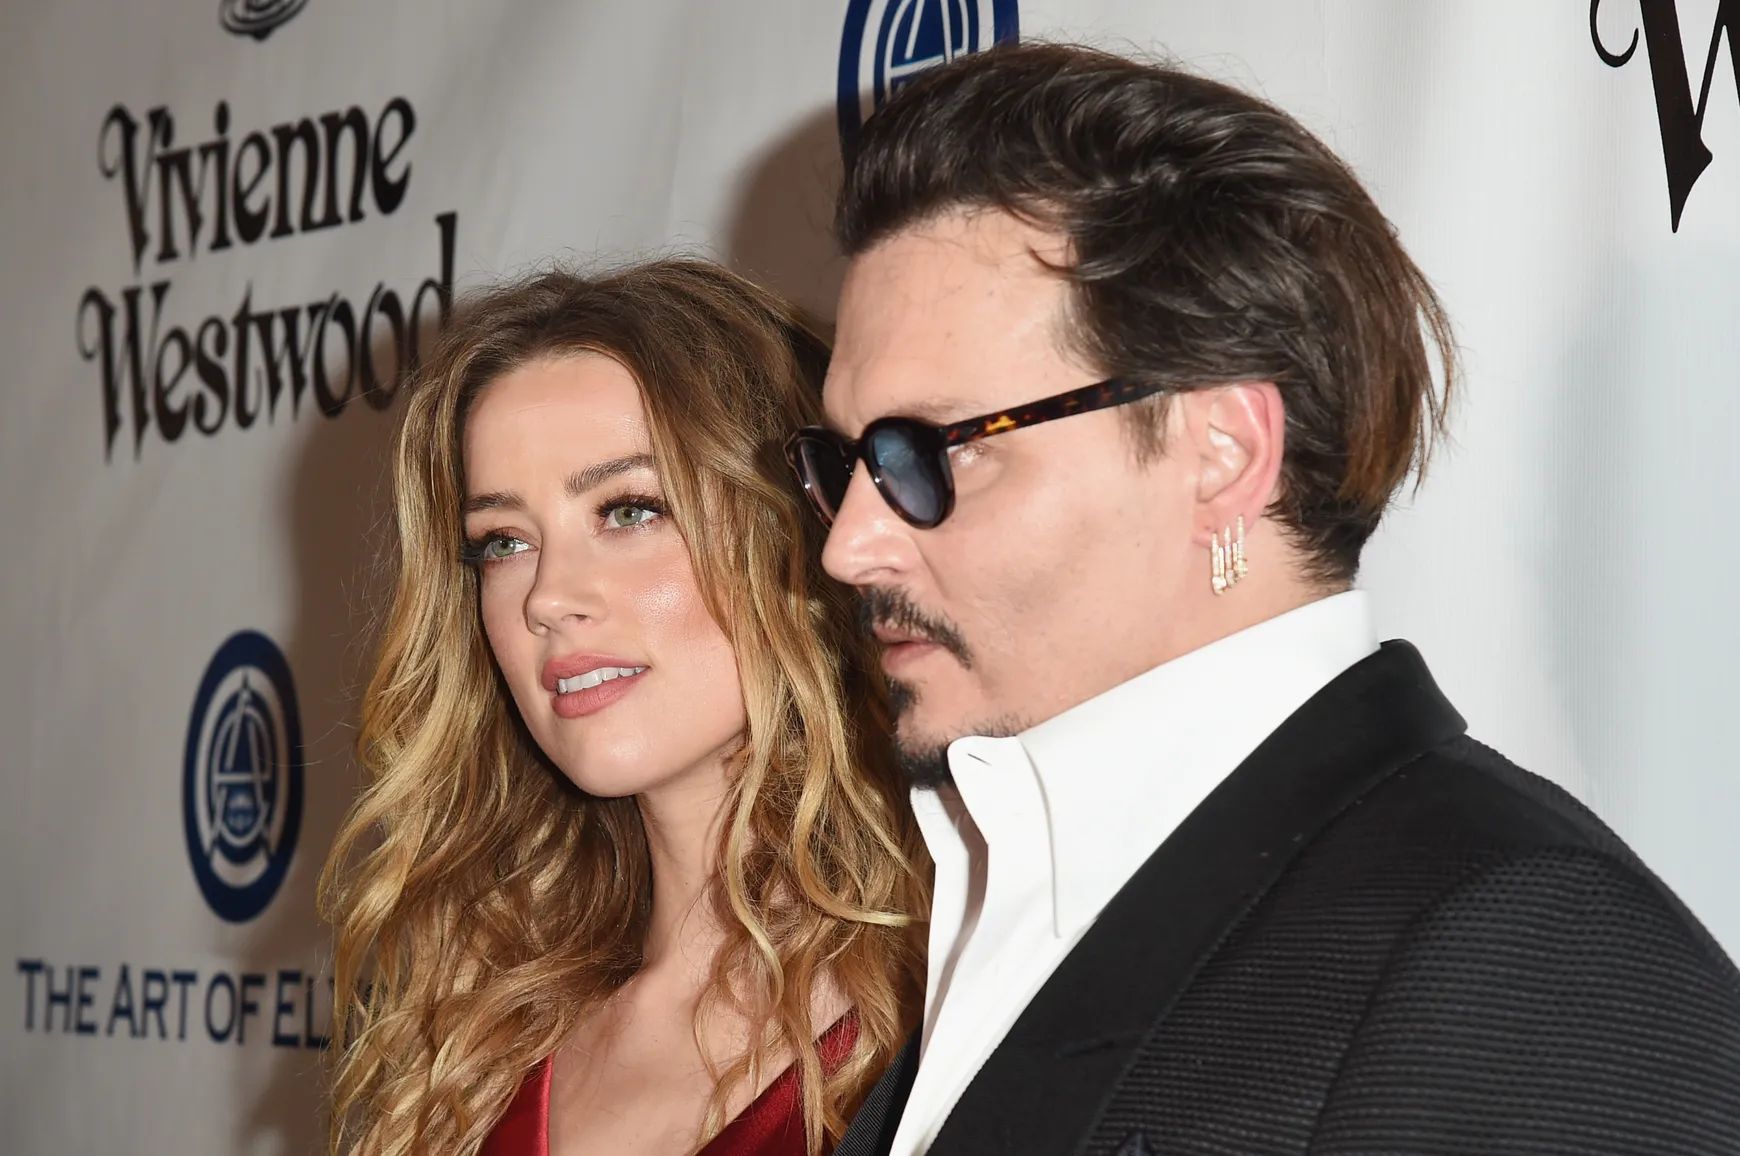 Did Amber Heard just confess to physically abusing Johnny Depp? Apparently she pelted the actor with pots and pans during their marriage. Read to find more details. 10